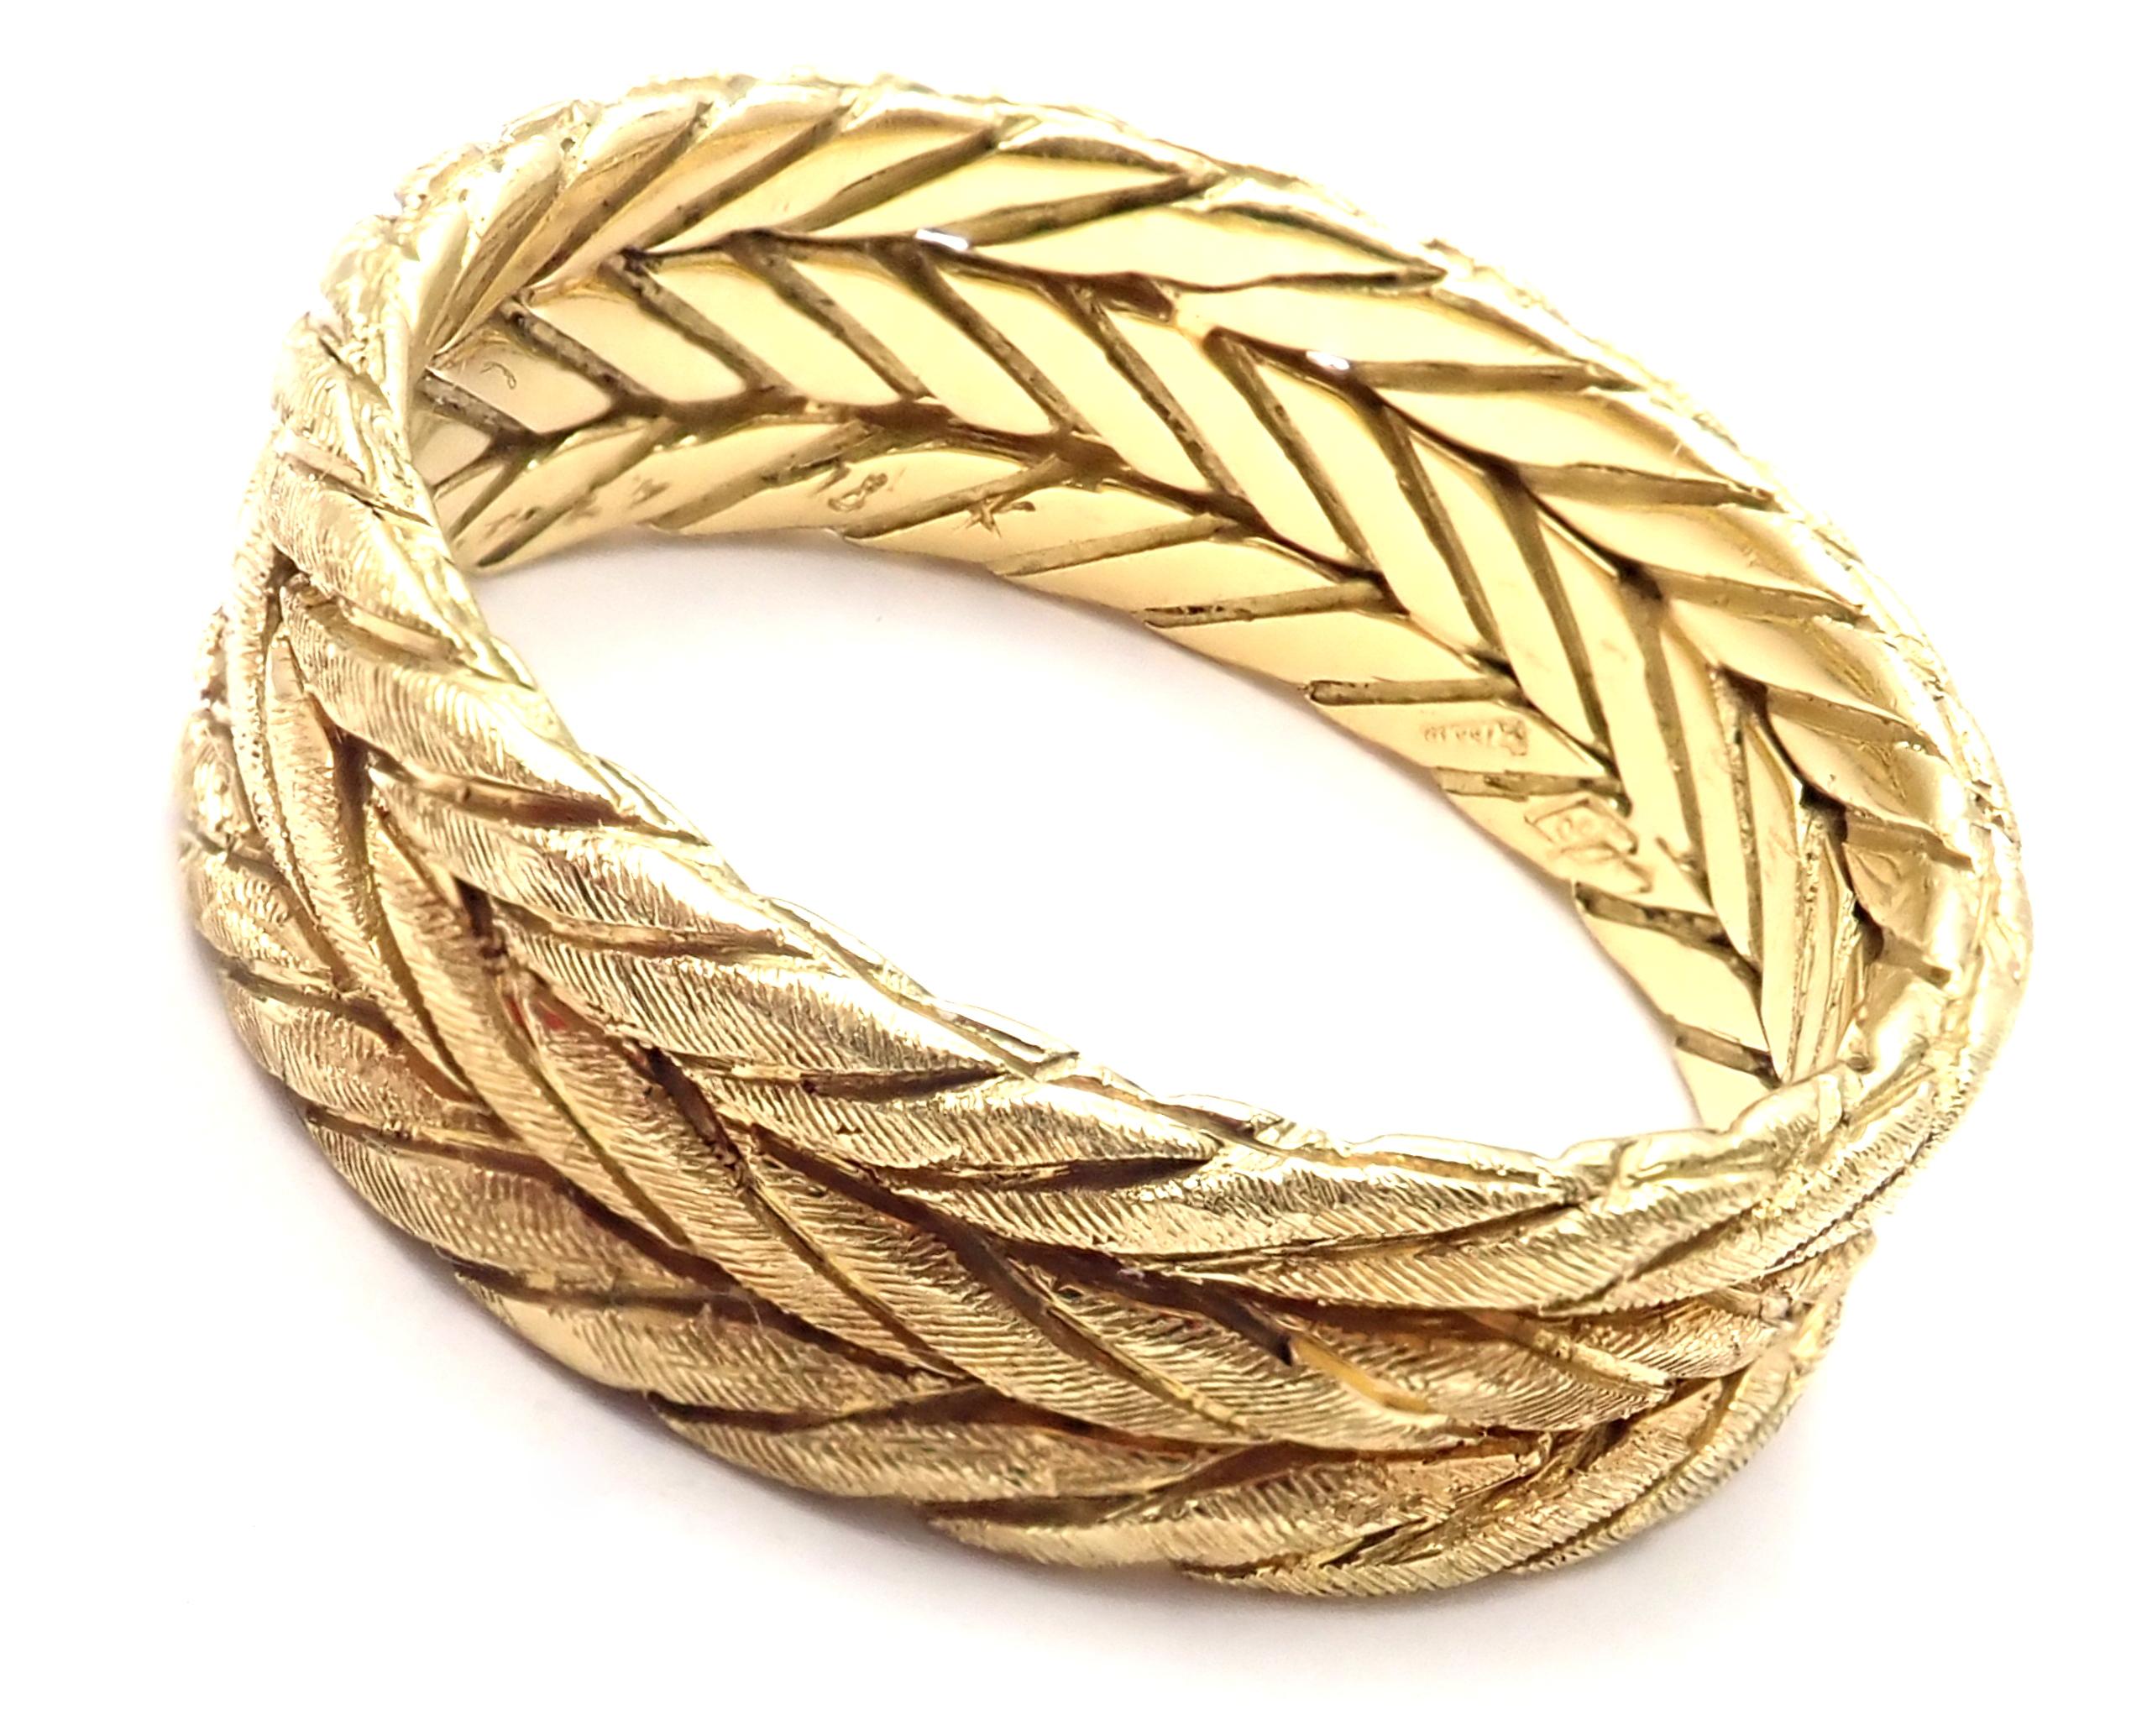 18k Yellow Gold Braided Band Ring by Buccellati.
Details: 
Size: 6.5
Weight: 5.5 grams
Width:	7mm
Stamped Hallmarks: Buccellati Italy 18k
*Free Shipping within the United States*
YOUR PRICE: $1,150
T2487eod